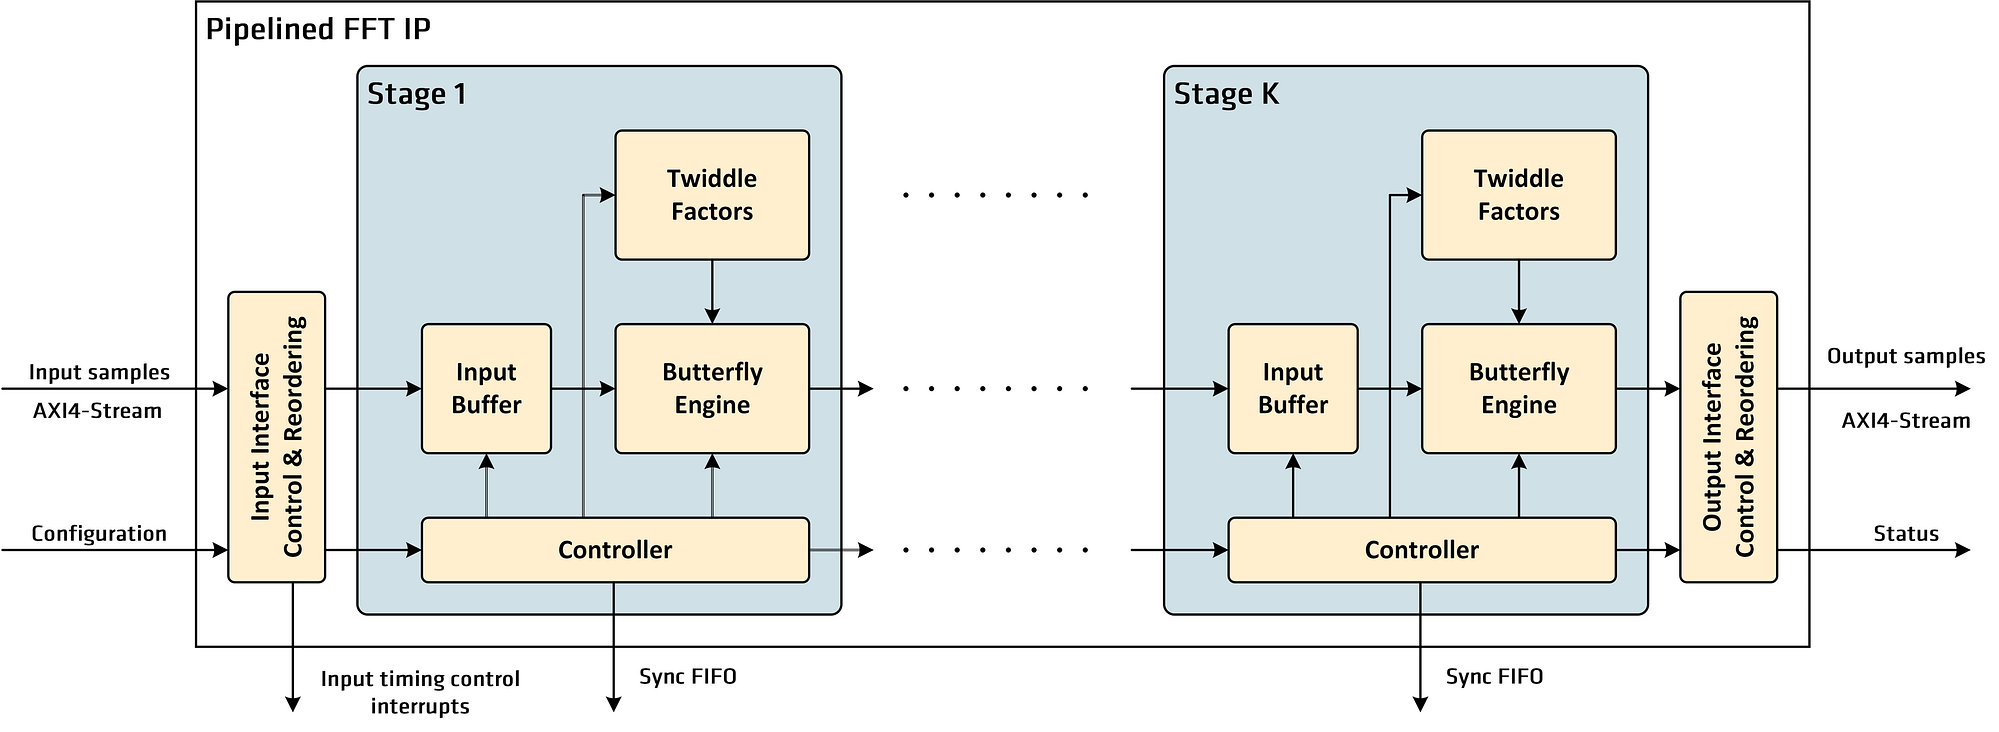 Comcores Pipelined FFT diagram